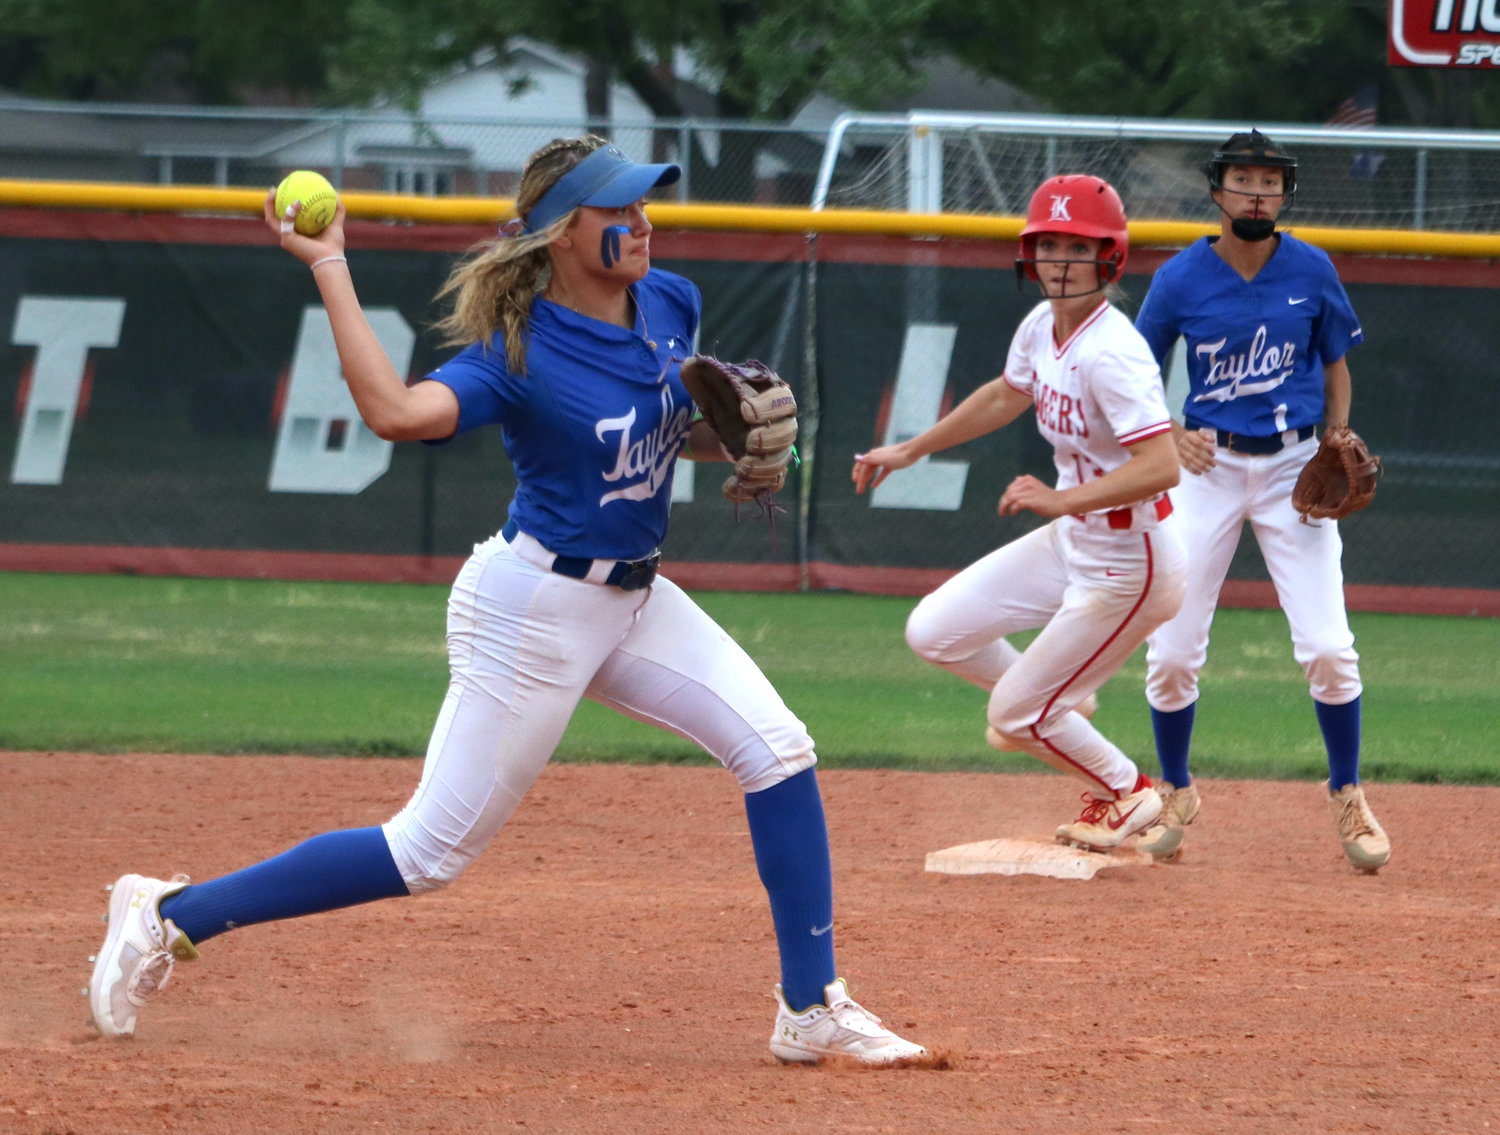 Katherine Brunner throws to first base during Tuesday’s game between Katy and Taylor at the Katy softball field.